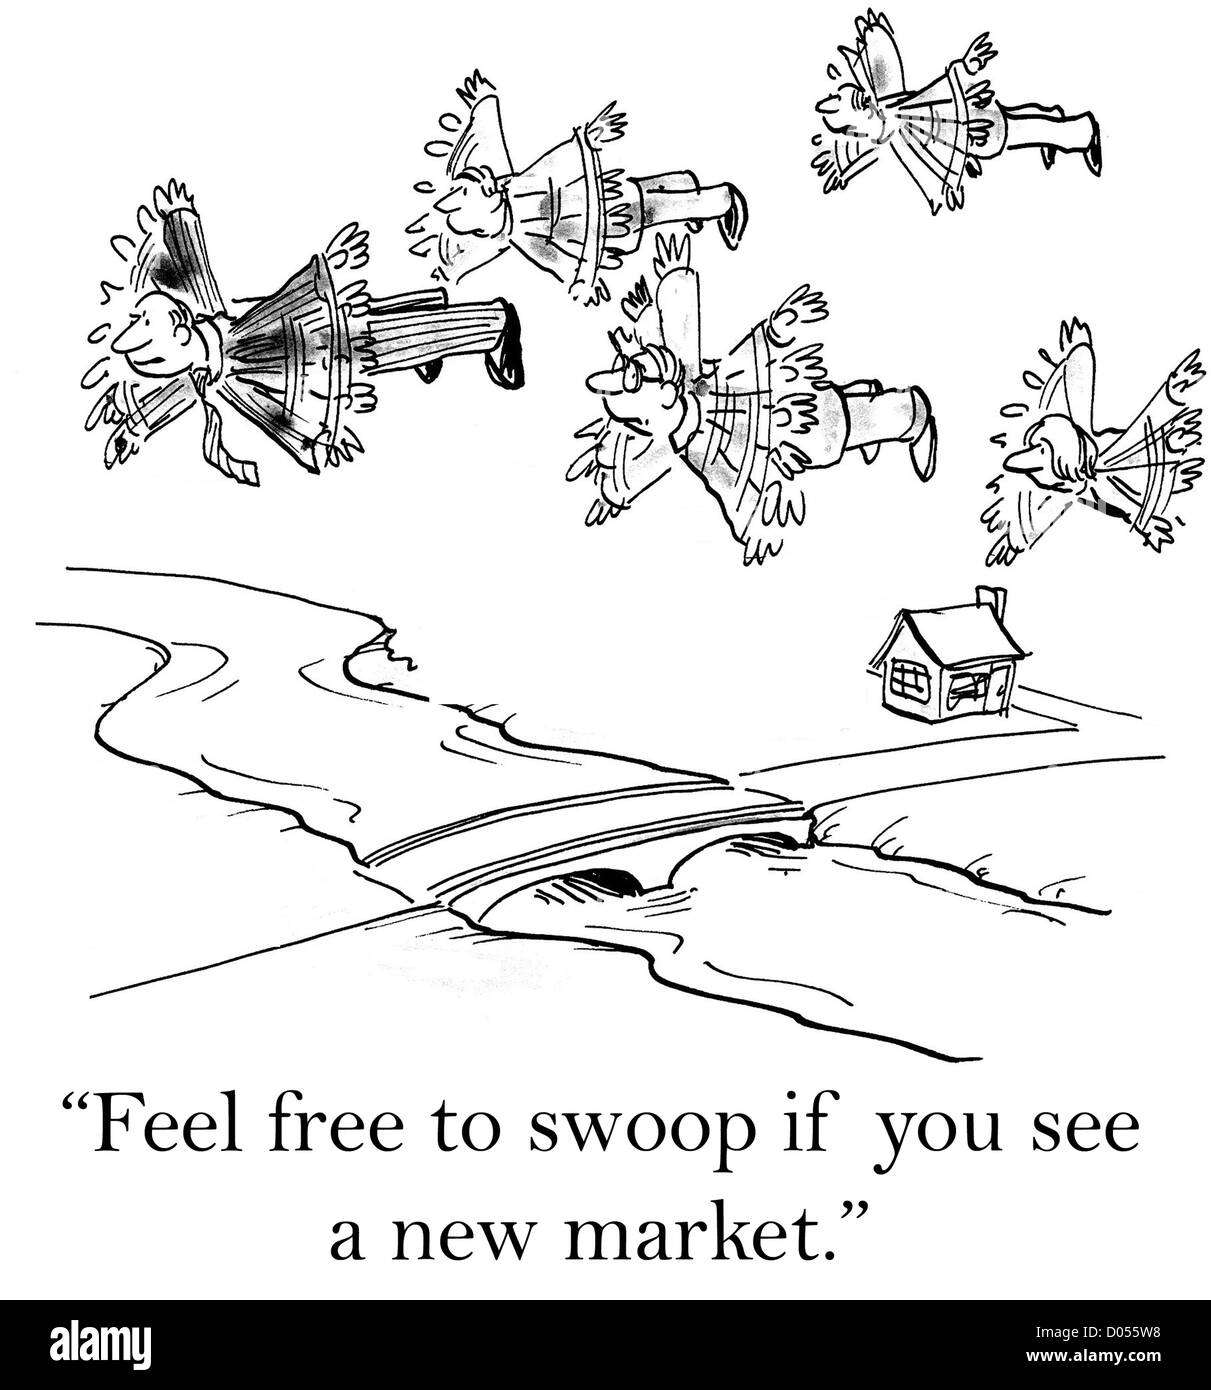 'Feel free to swoop if you see a new market.' Stock Photo